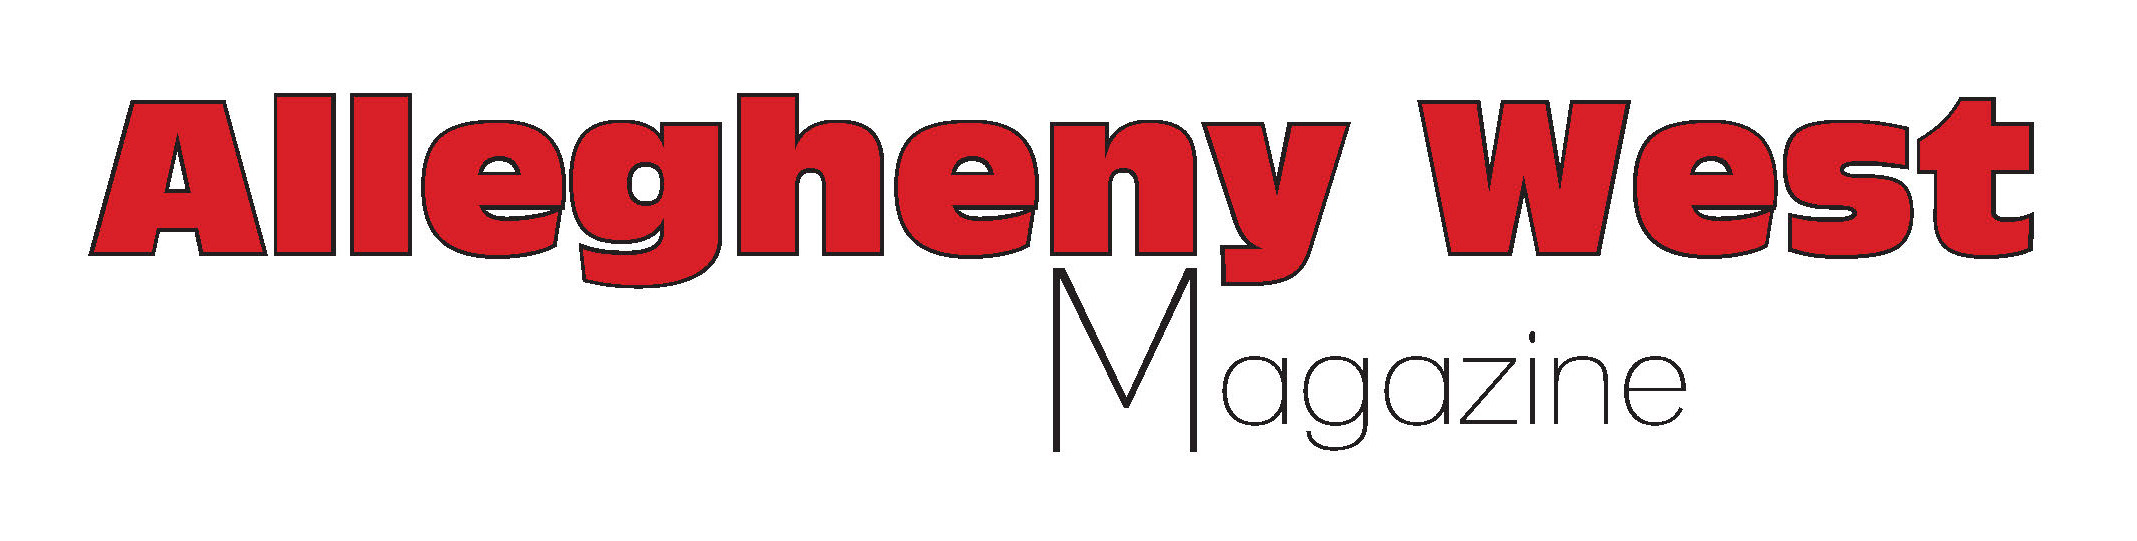 Advertise with Allegheny West Magazine 